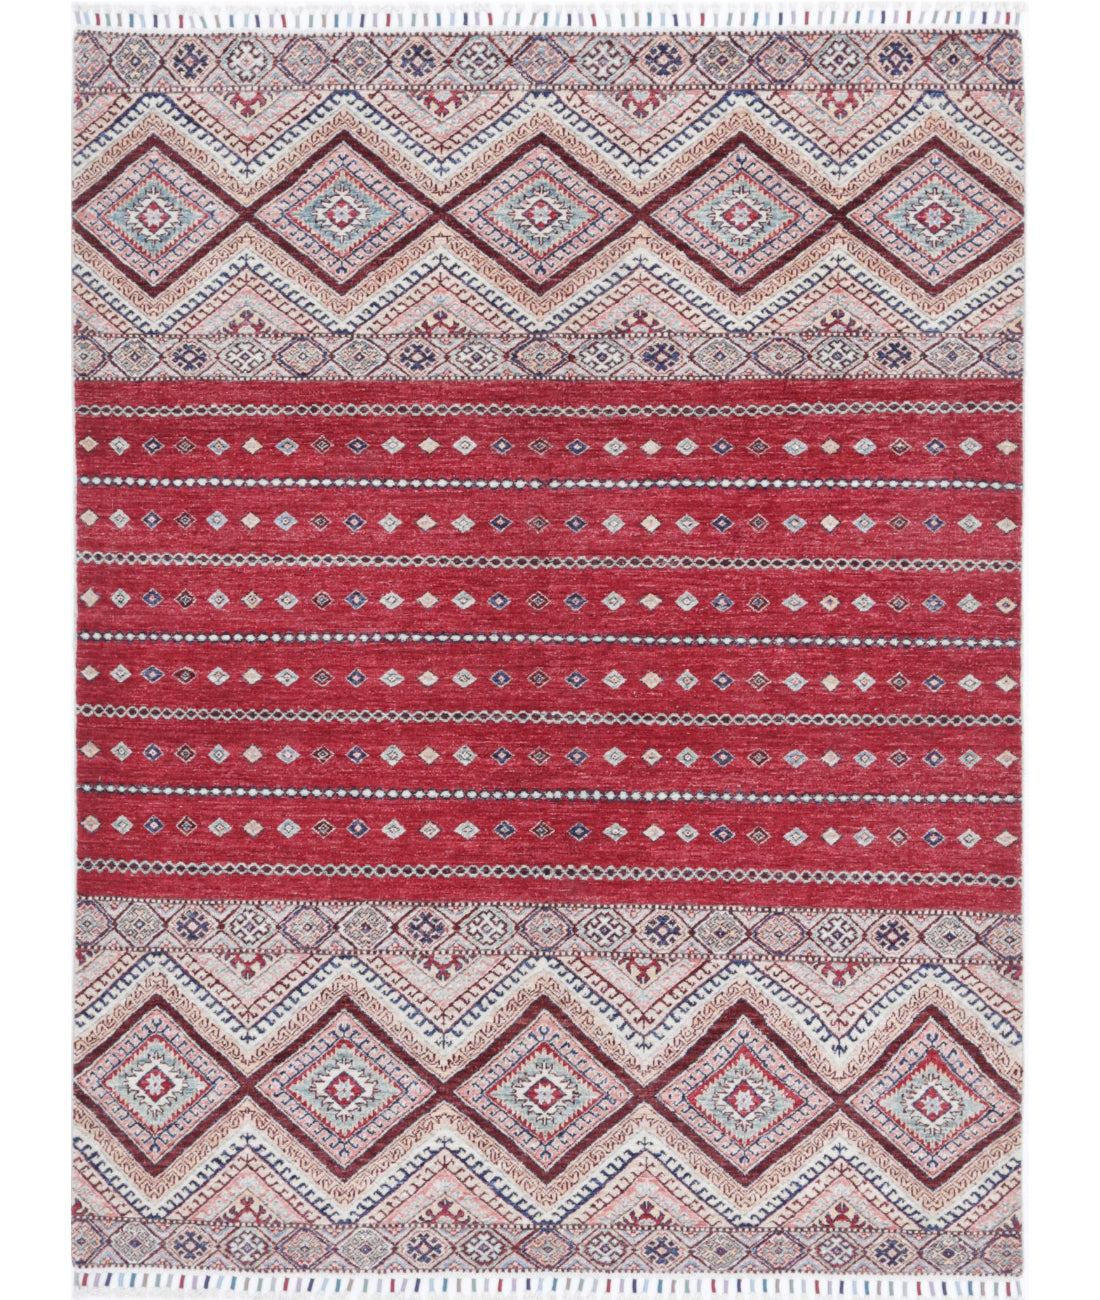 Hand Knotted Khurjeen Wool Rug - 5'6'' x 7'2'' 5'6'' x 7'2'' (165 X 215) / Multi / Multi